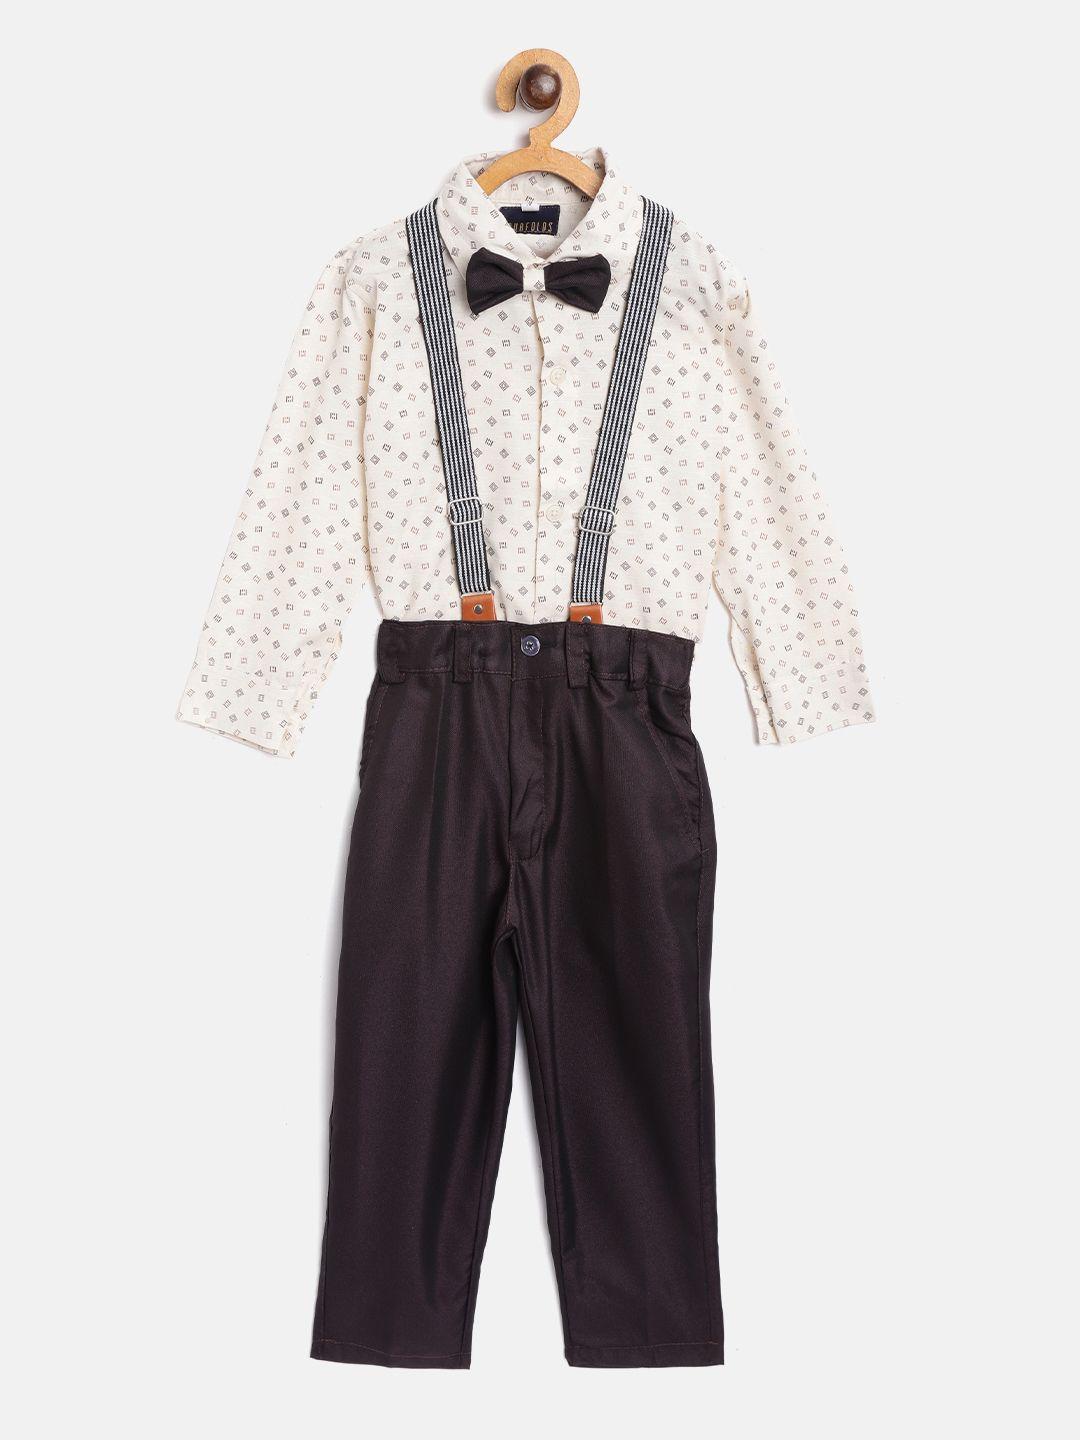 fourfolds boys off-white & coffee brown printed clothing set with suspenders & bow tie